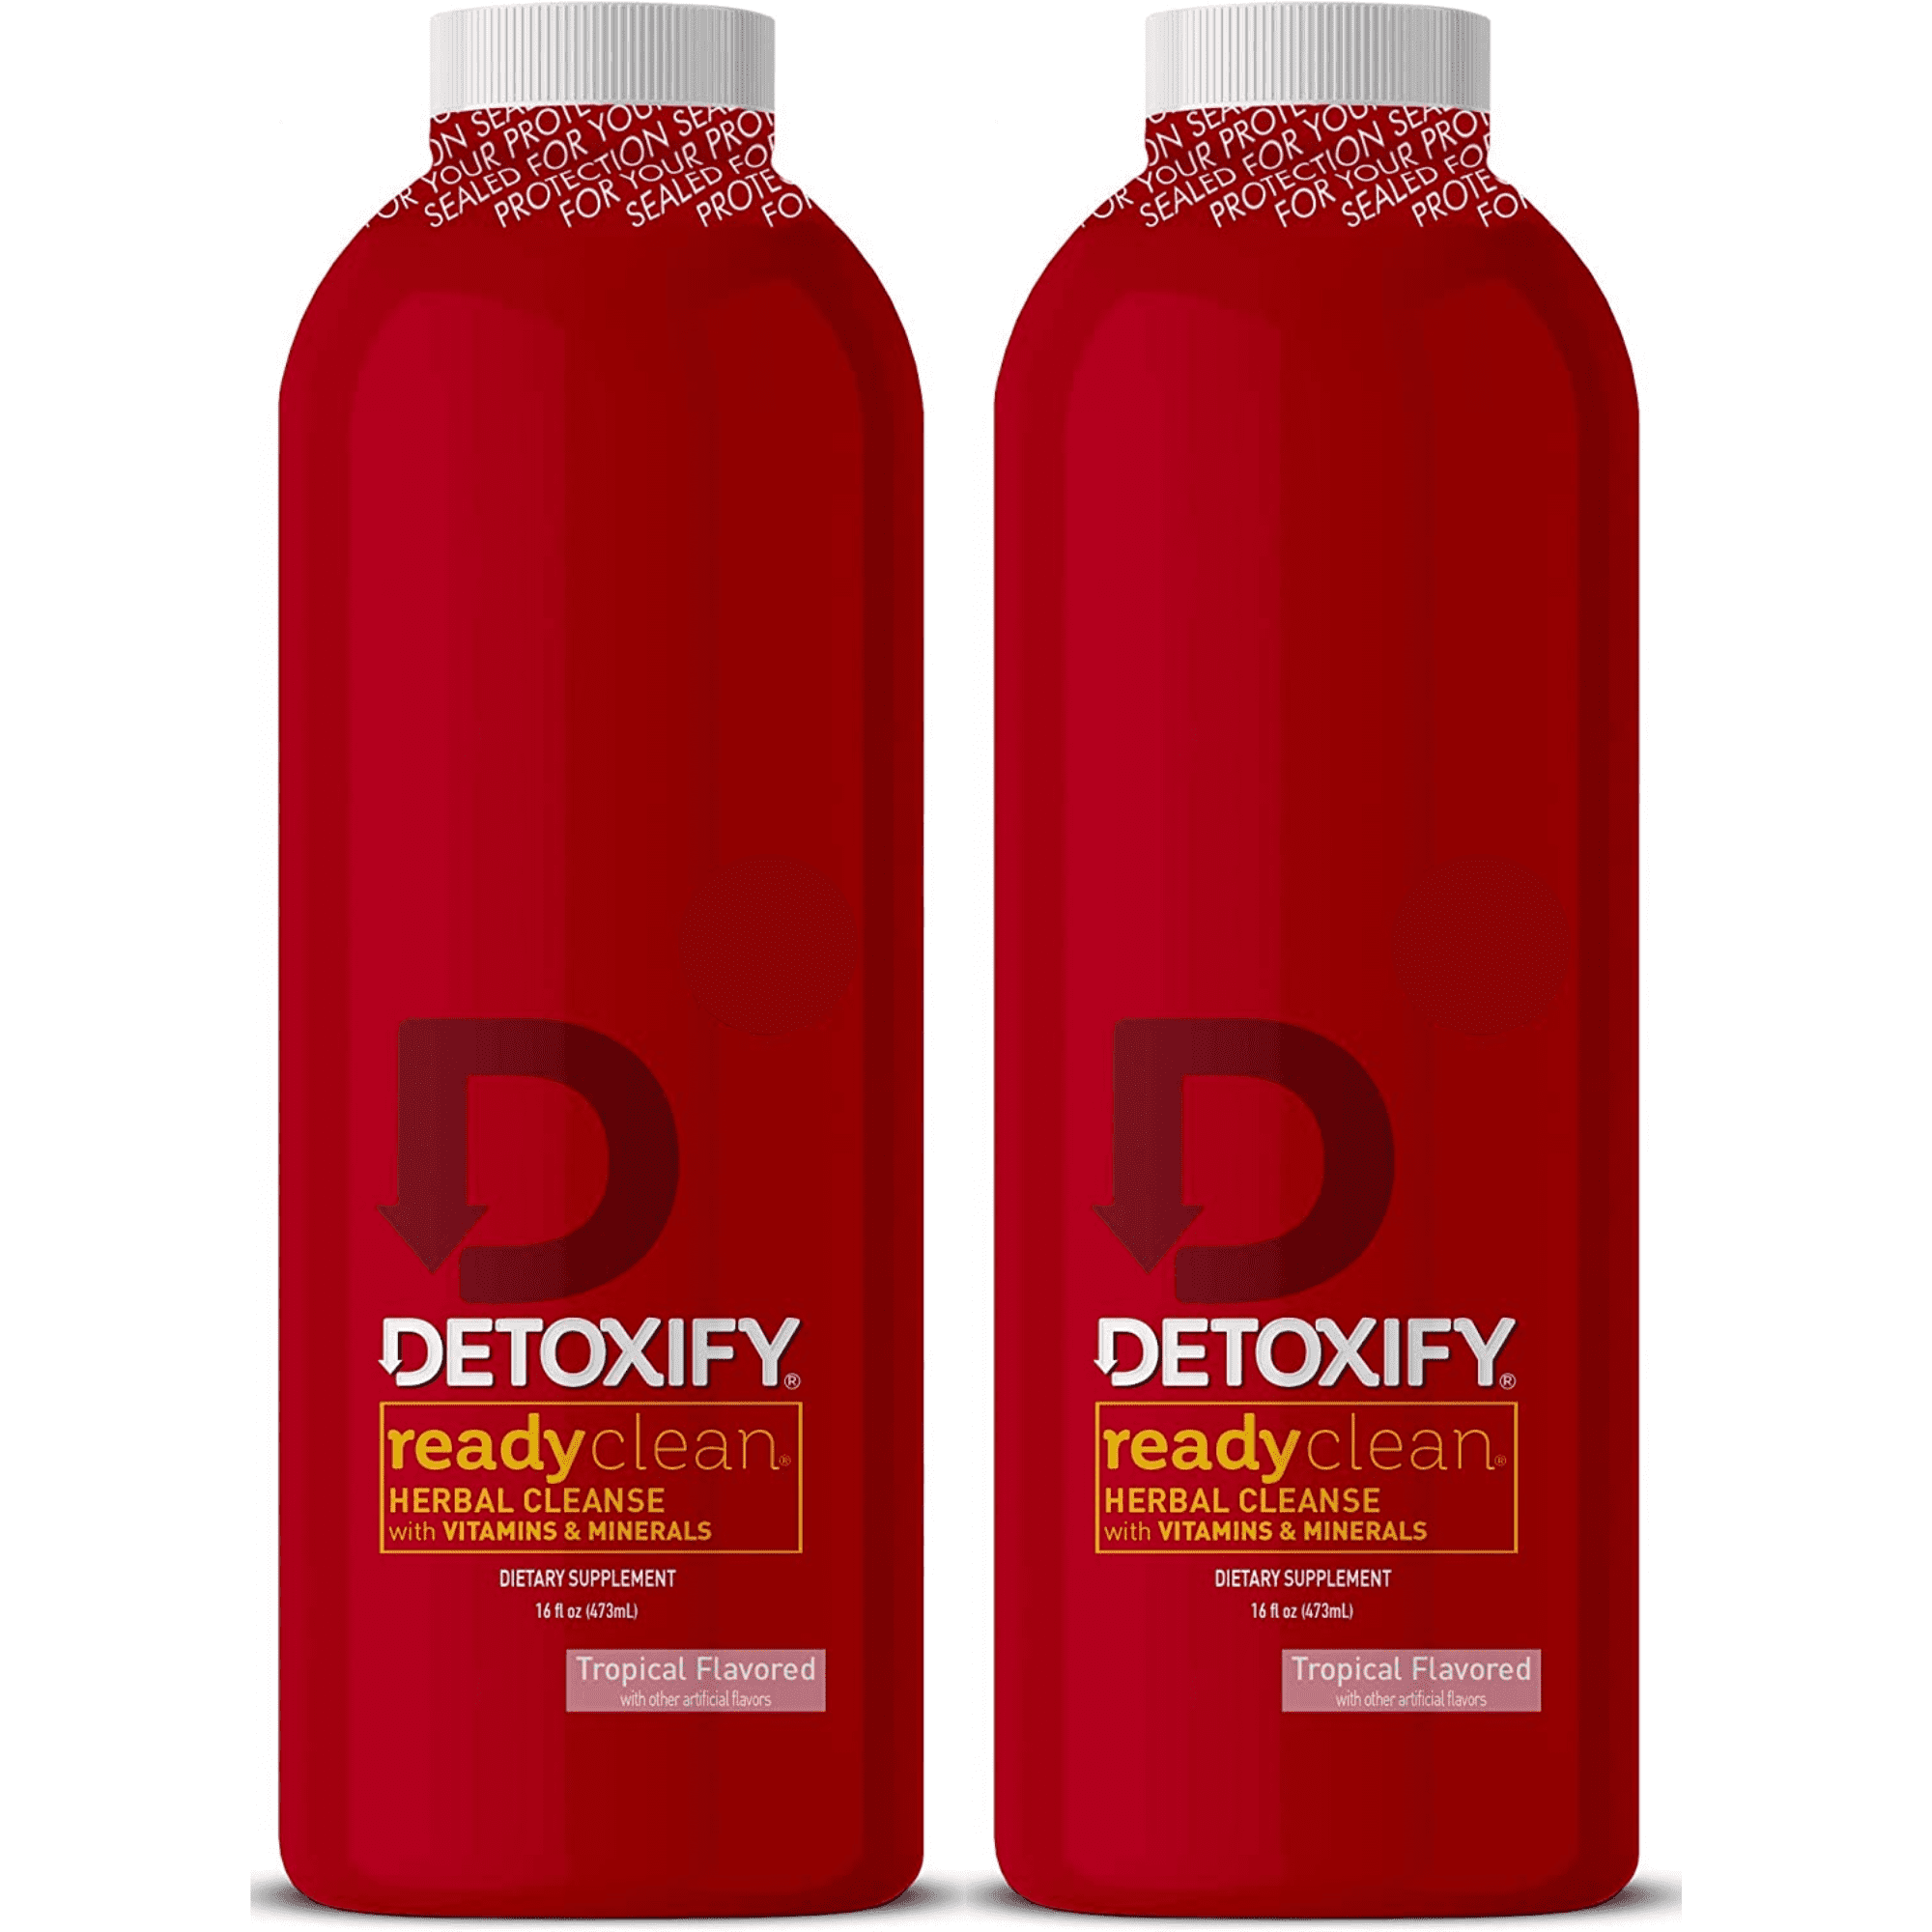 Detoxify Ready Clean, Herbal, Natural Tropical Flavor - 1 pt